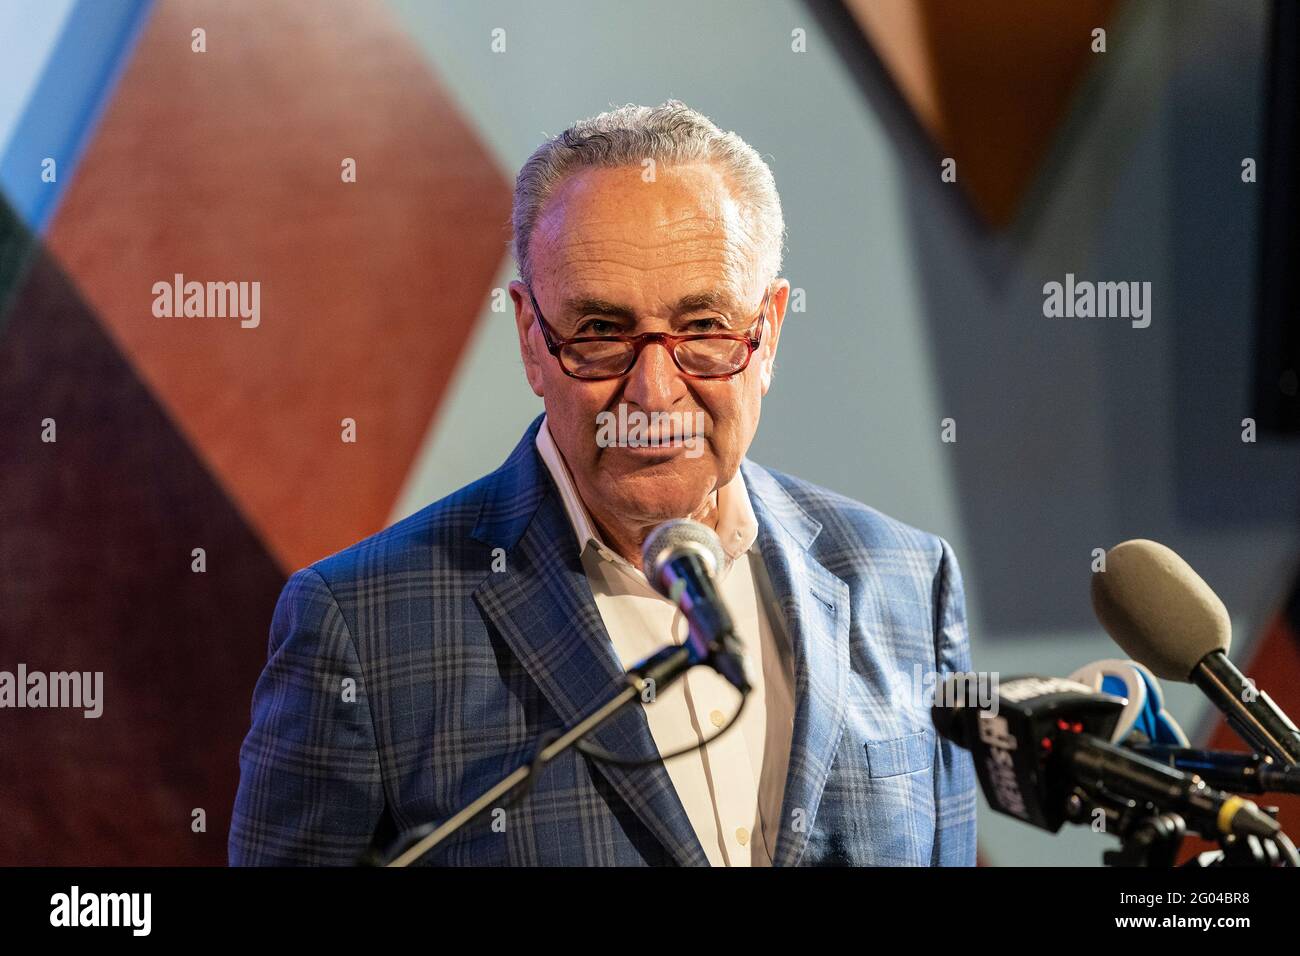 New York, United States. 31st May, 2021. U. S. Senator Charles Schumer speaks at Carolines on Broadway comedy club re-opening after pandemic ceremony in New York on May 31, 2021. (Photo by Lev Radin/Sipa USA) Credit: Sipa USA/Alamy Live News Stock Photo